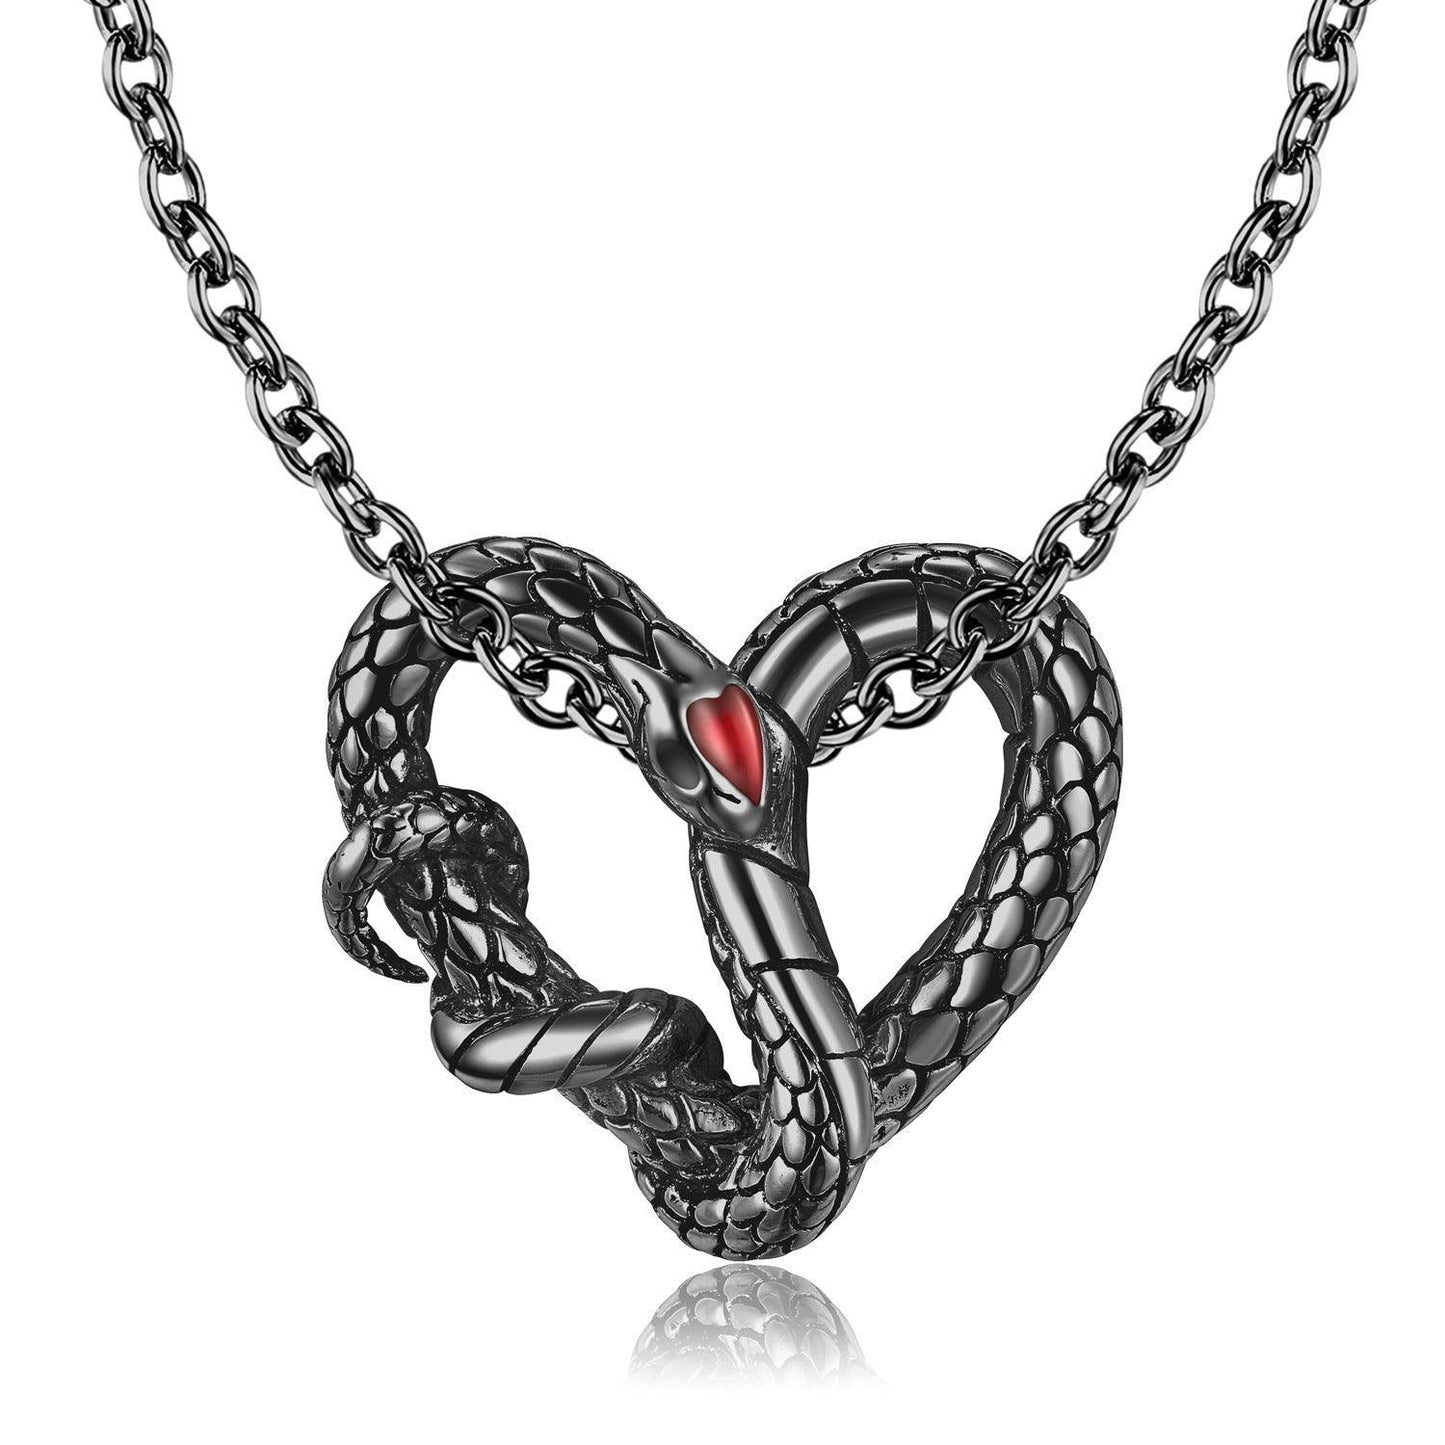 S925 Silver Electroplating Black Gold Snake Necklace Heart Texture for Christmas 2023 | S925 Silver Electroplating Black Gold Snake Necklace Heart Texture - undefined | Black Gold Necklace, Electroplating Black Gold Snake Necklace, S925 Silver necklace | From Hunny Life | hunnylife.com